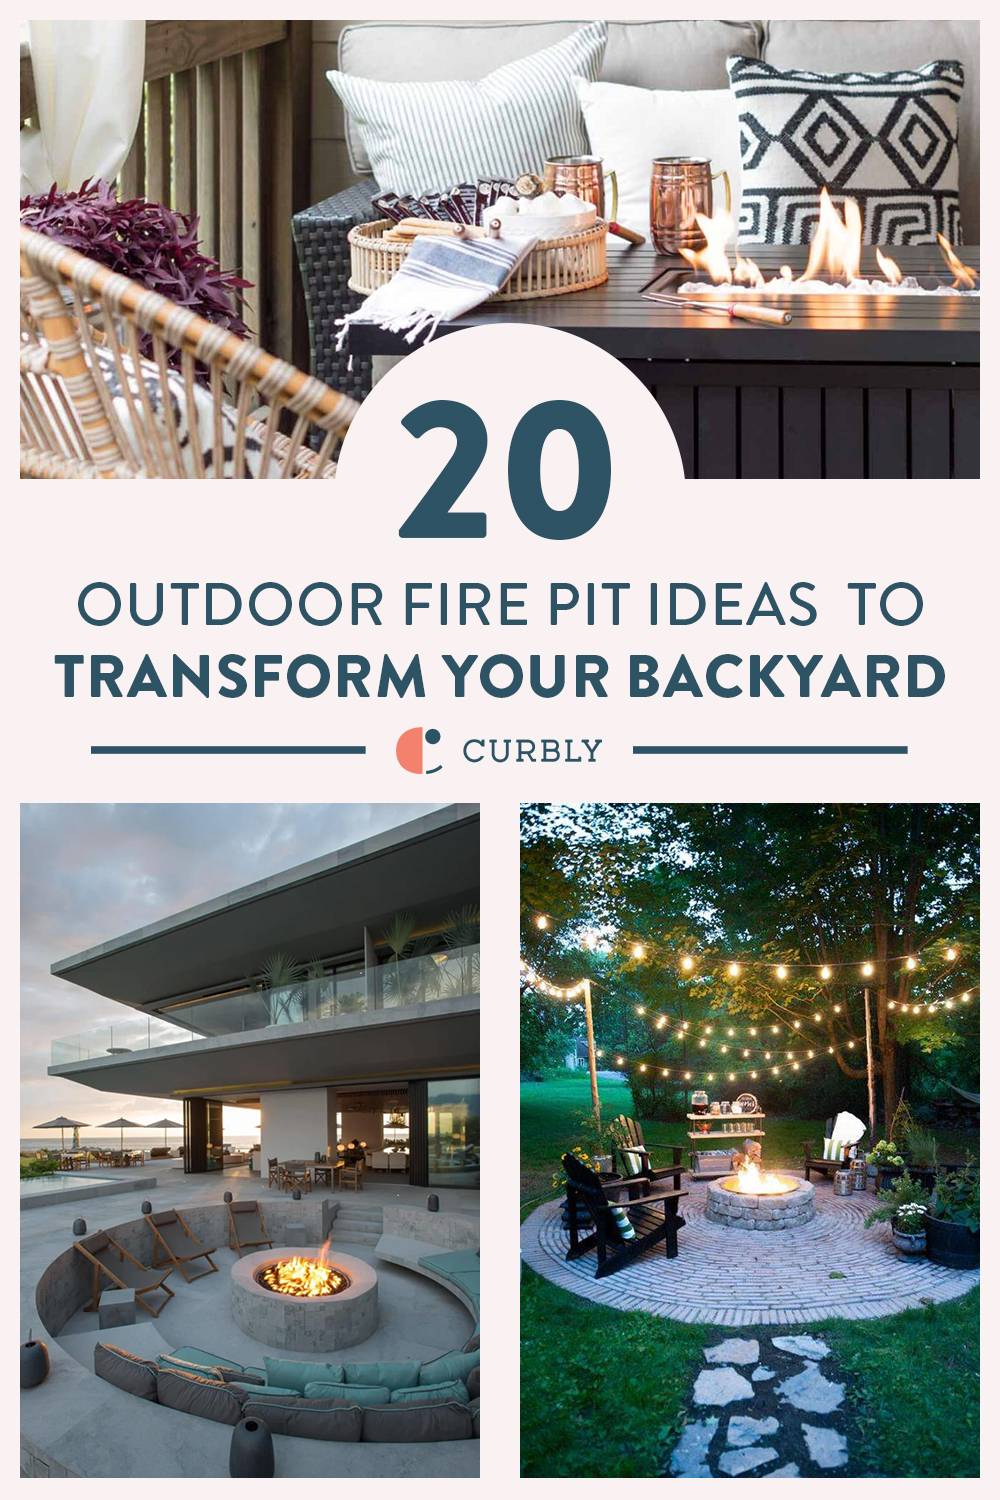 20 Outdoor Fire Pit Ideas to Transform Your Backyard - Curbly